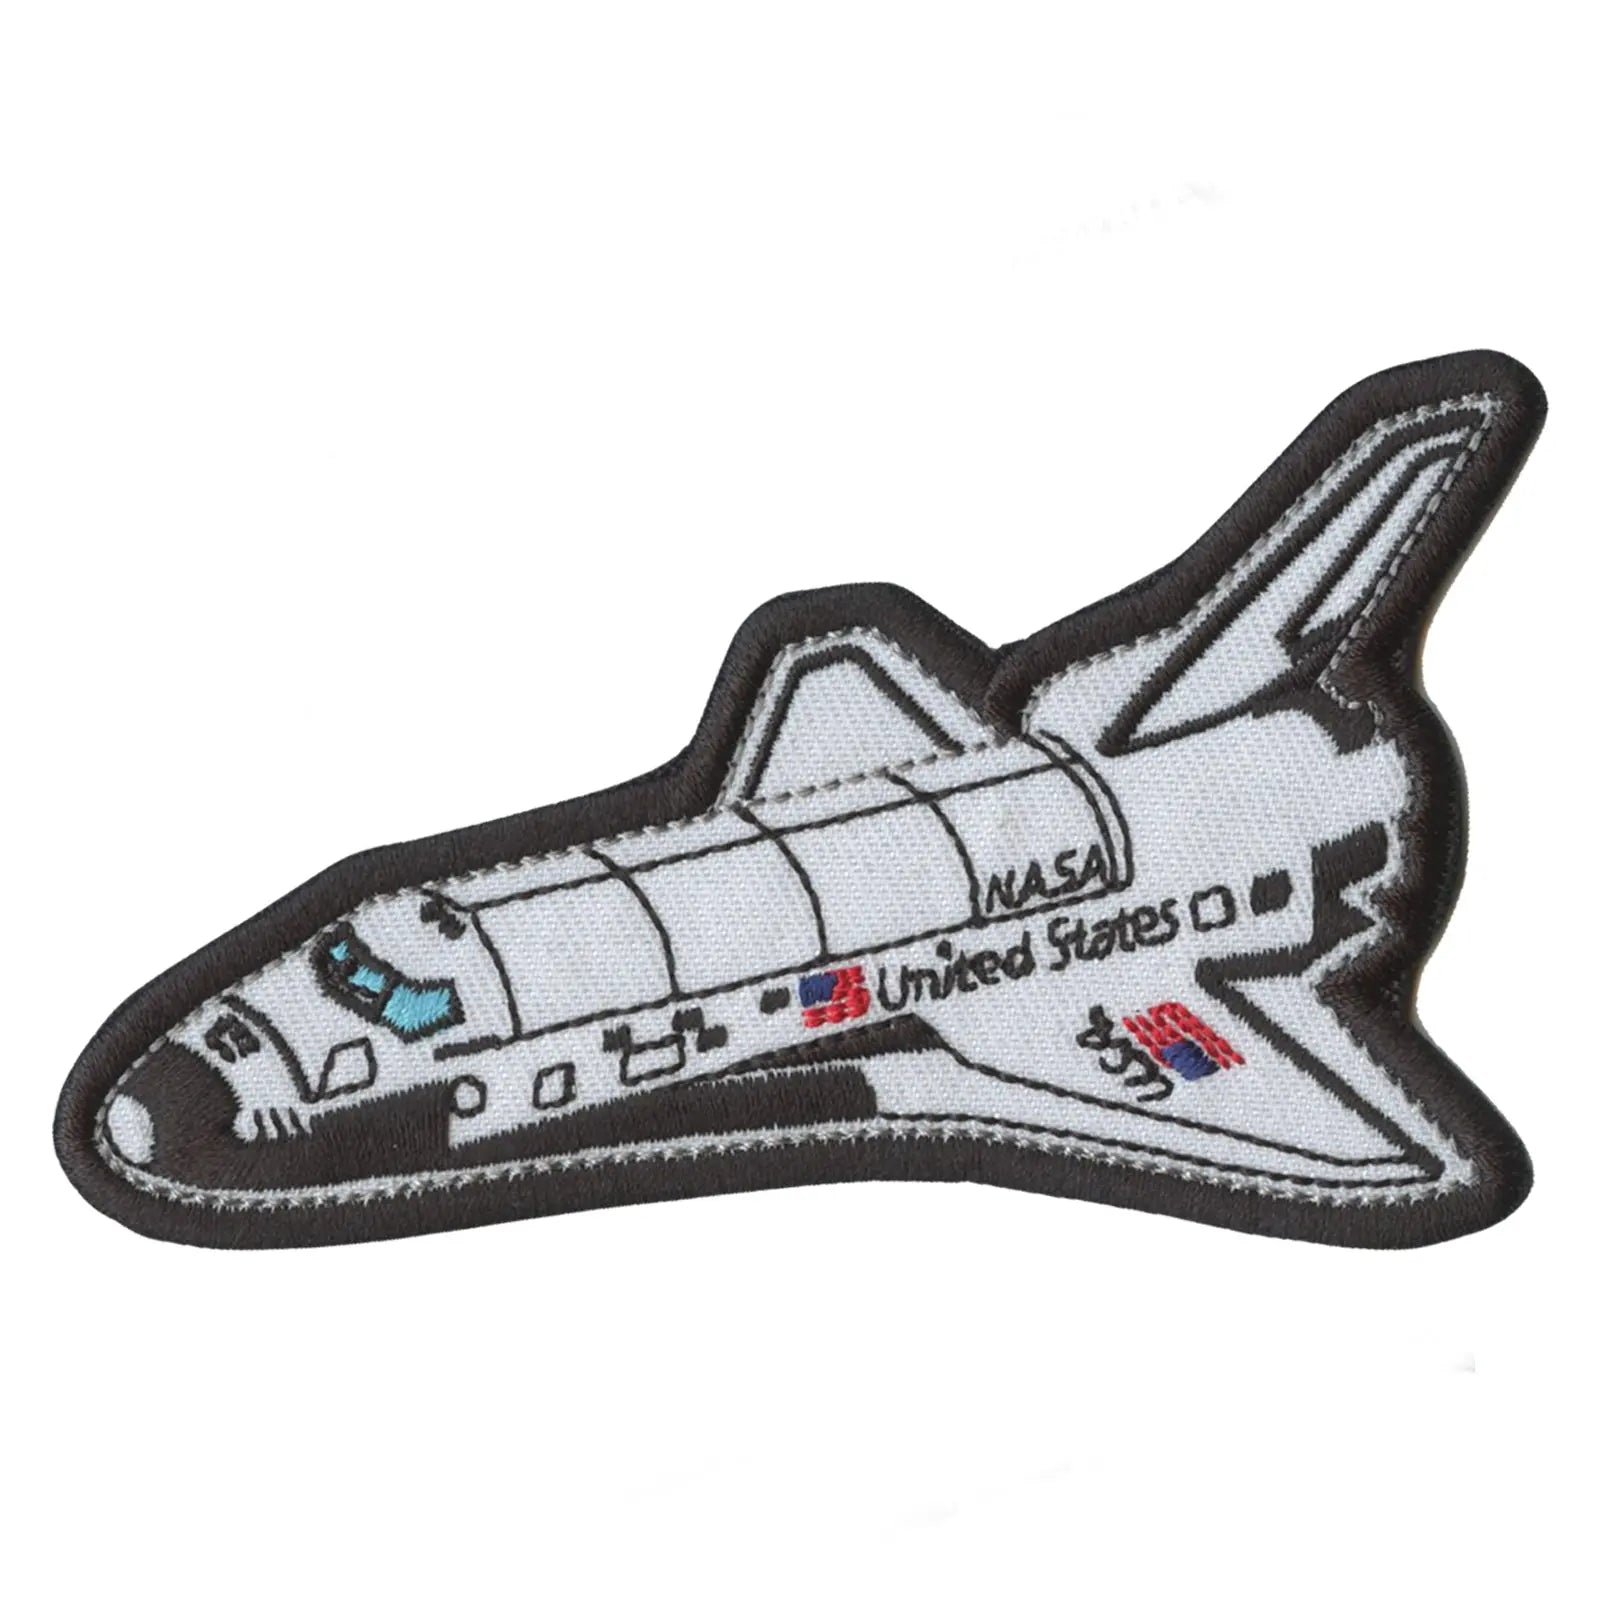 NASA Space Shuttle Iron On Patch